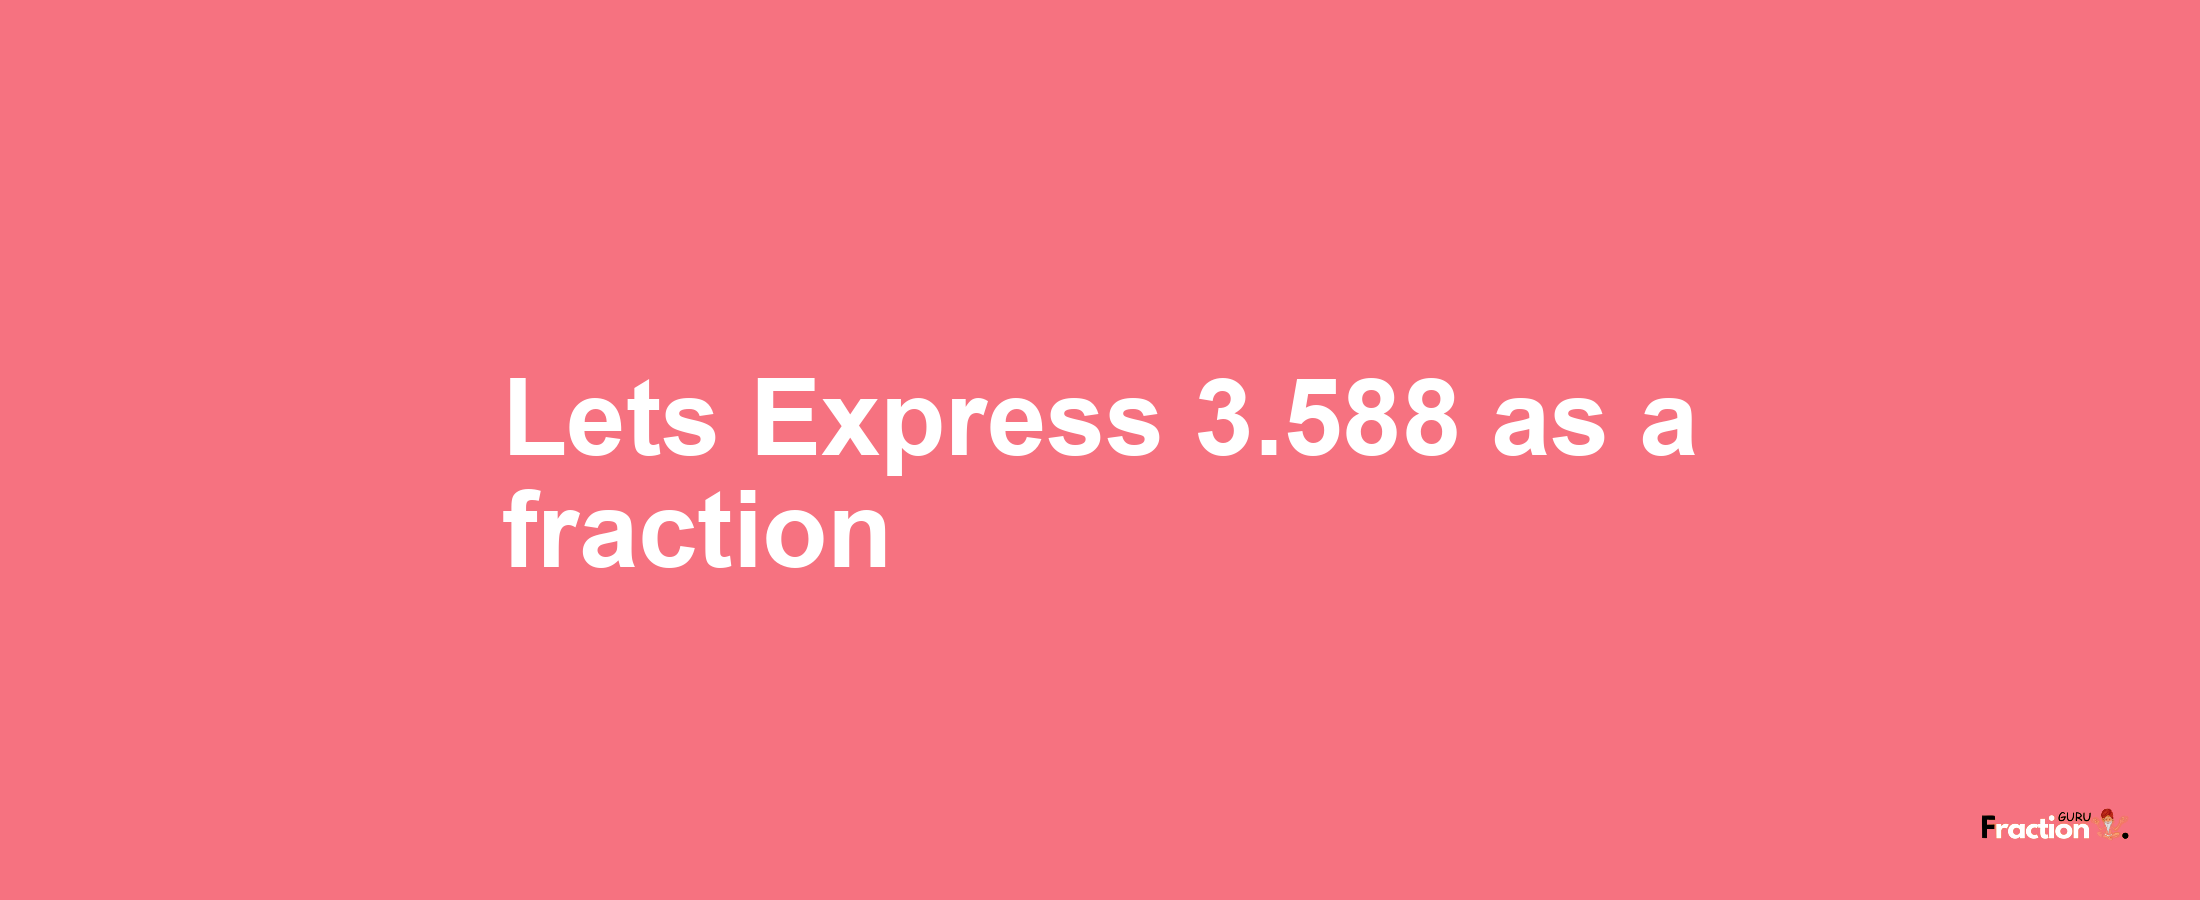 Lets Express 3.588 as afraction